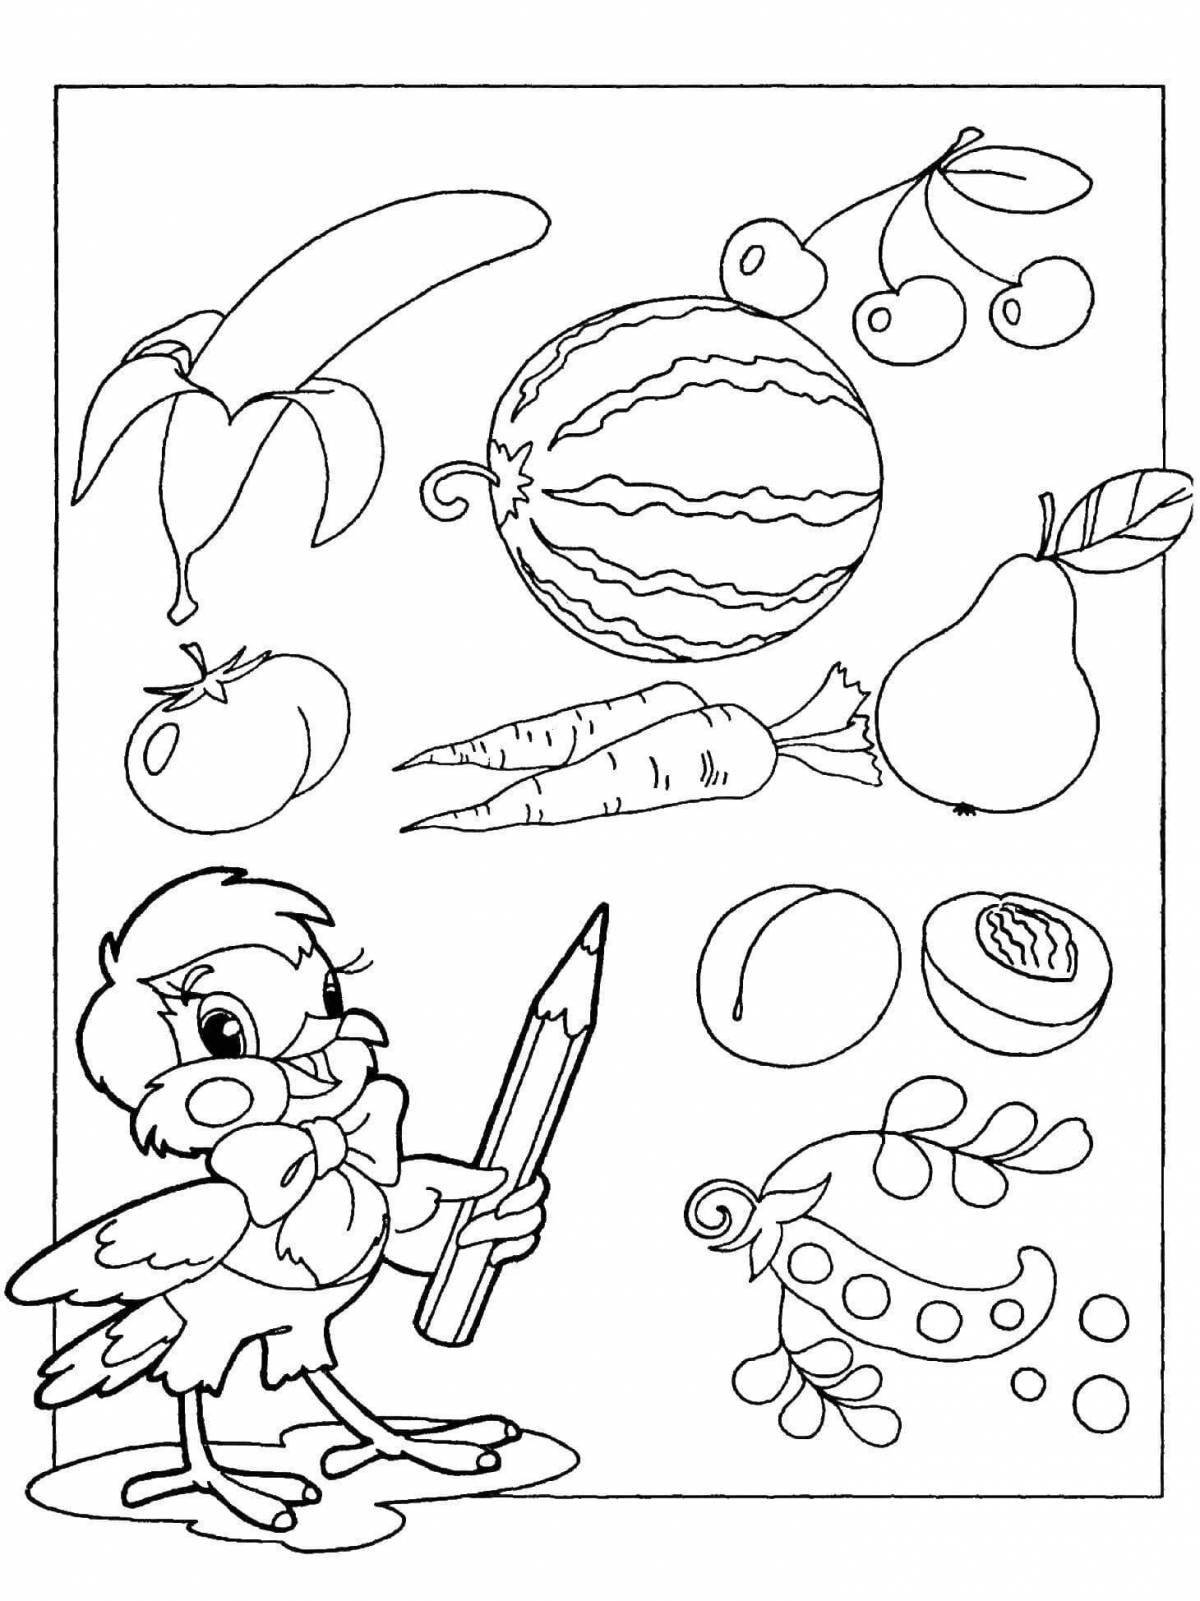 Color study 4 year coloring page